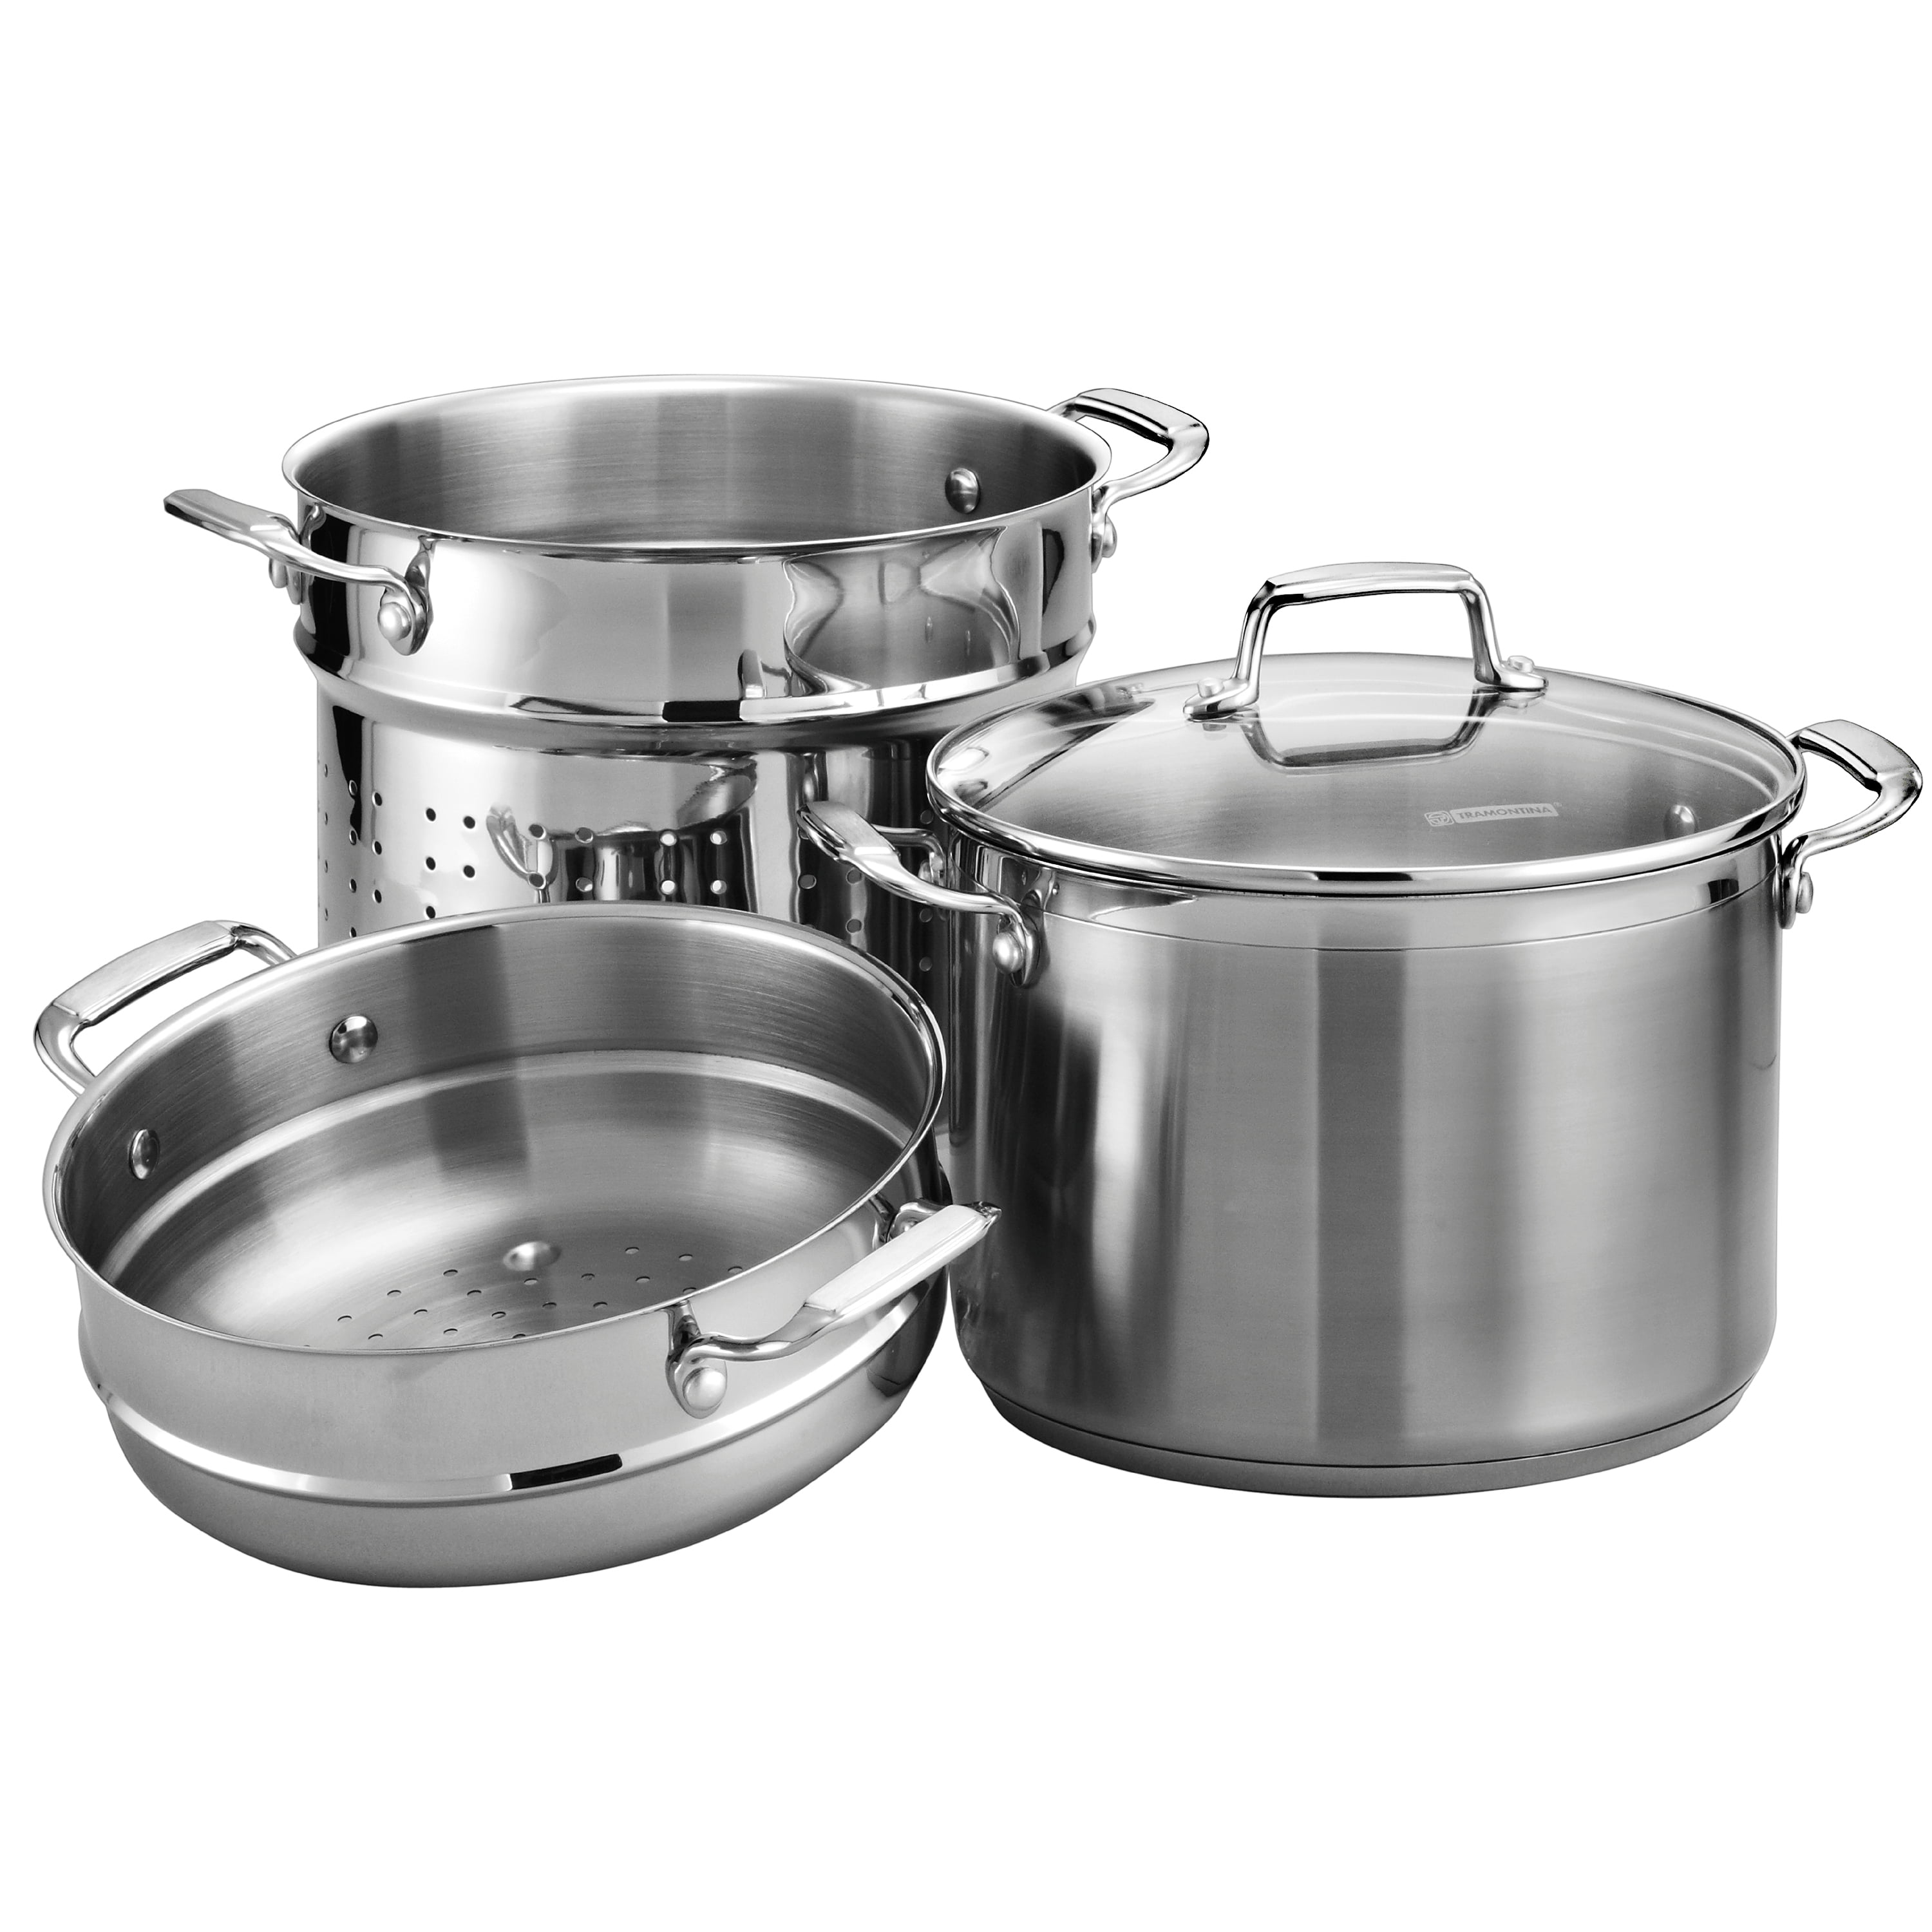 Tramontina Stainless Steel 8 Quart Covered Stockpot With Strainer